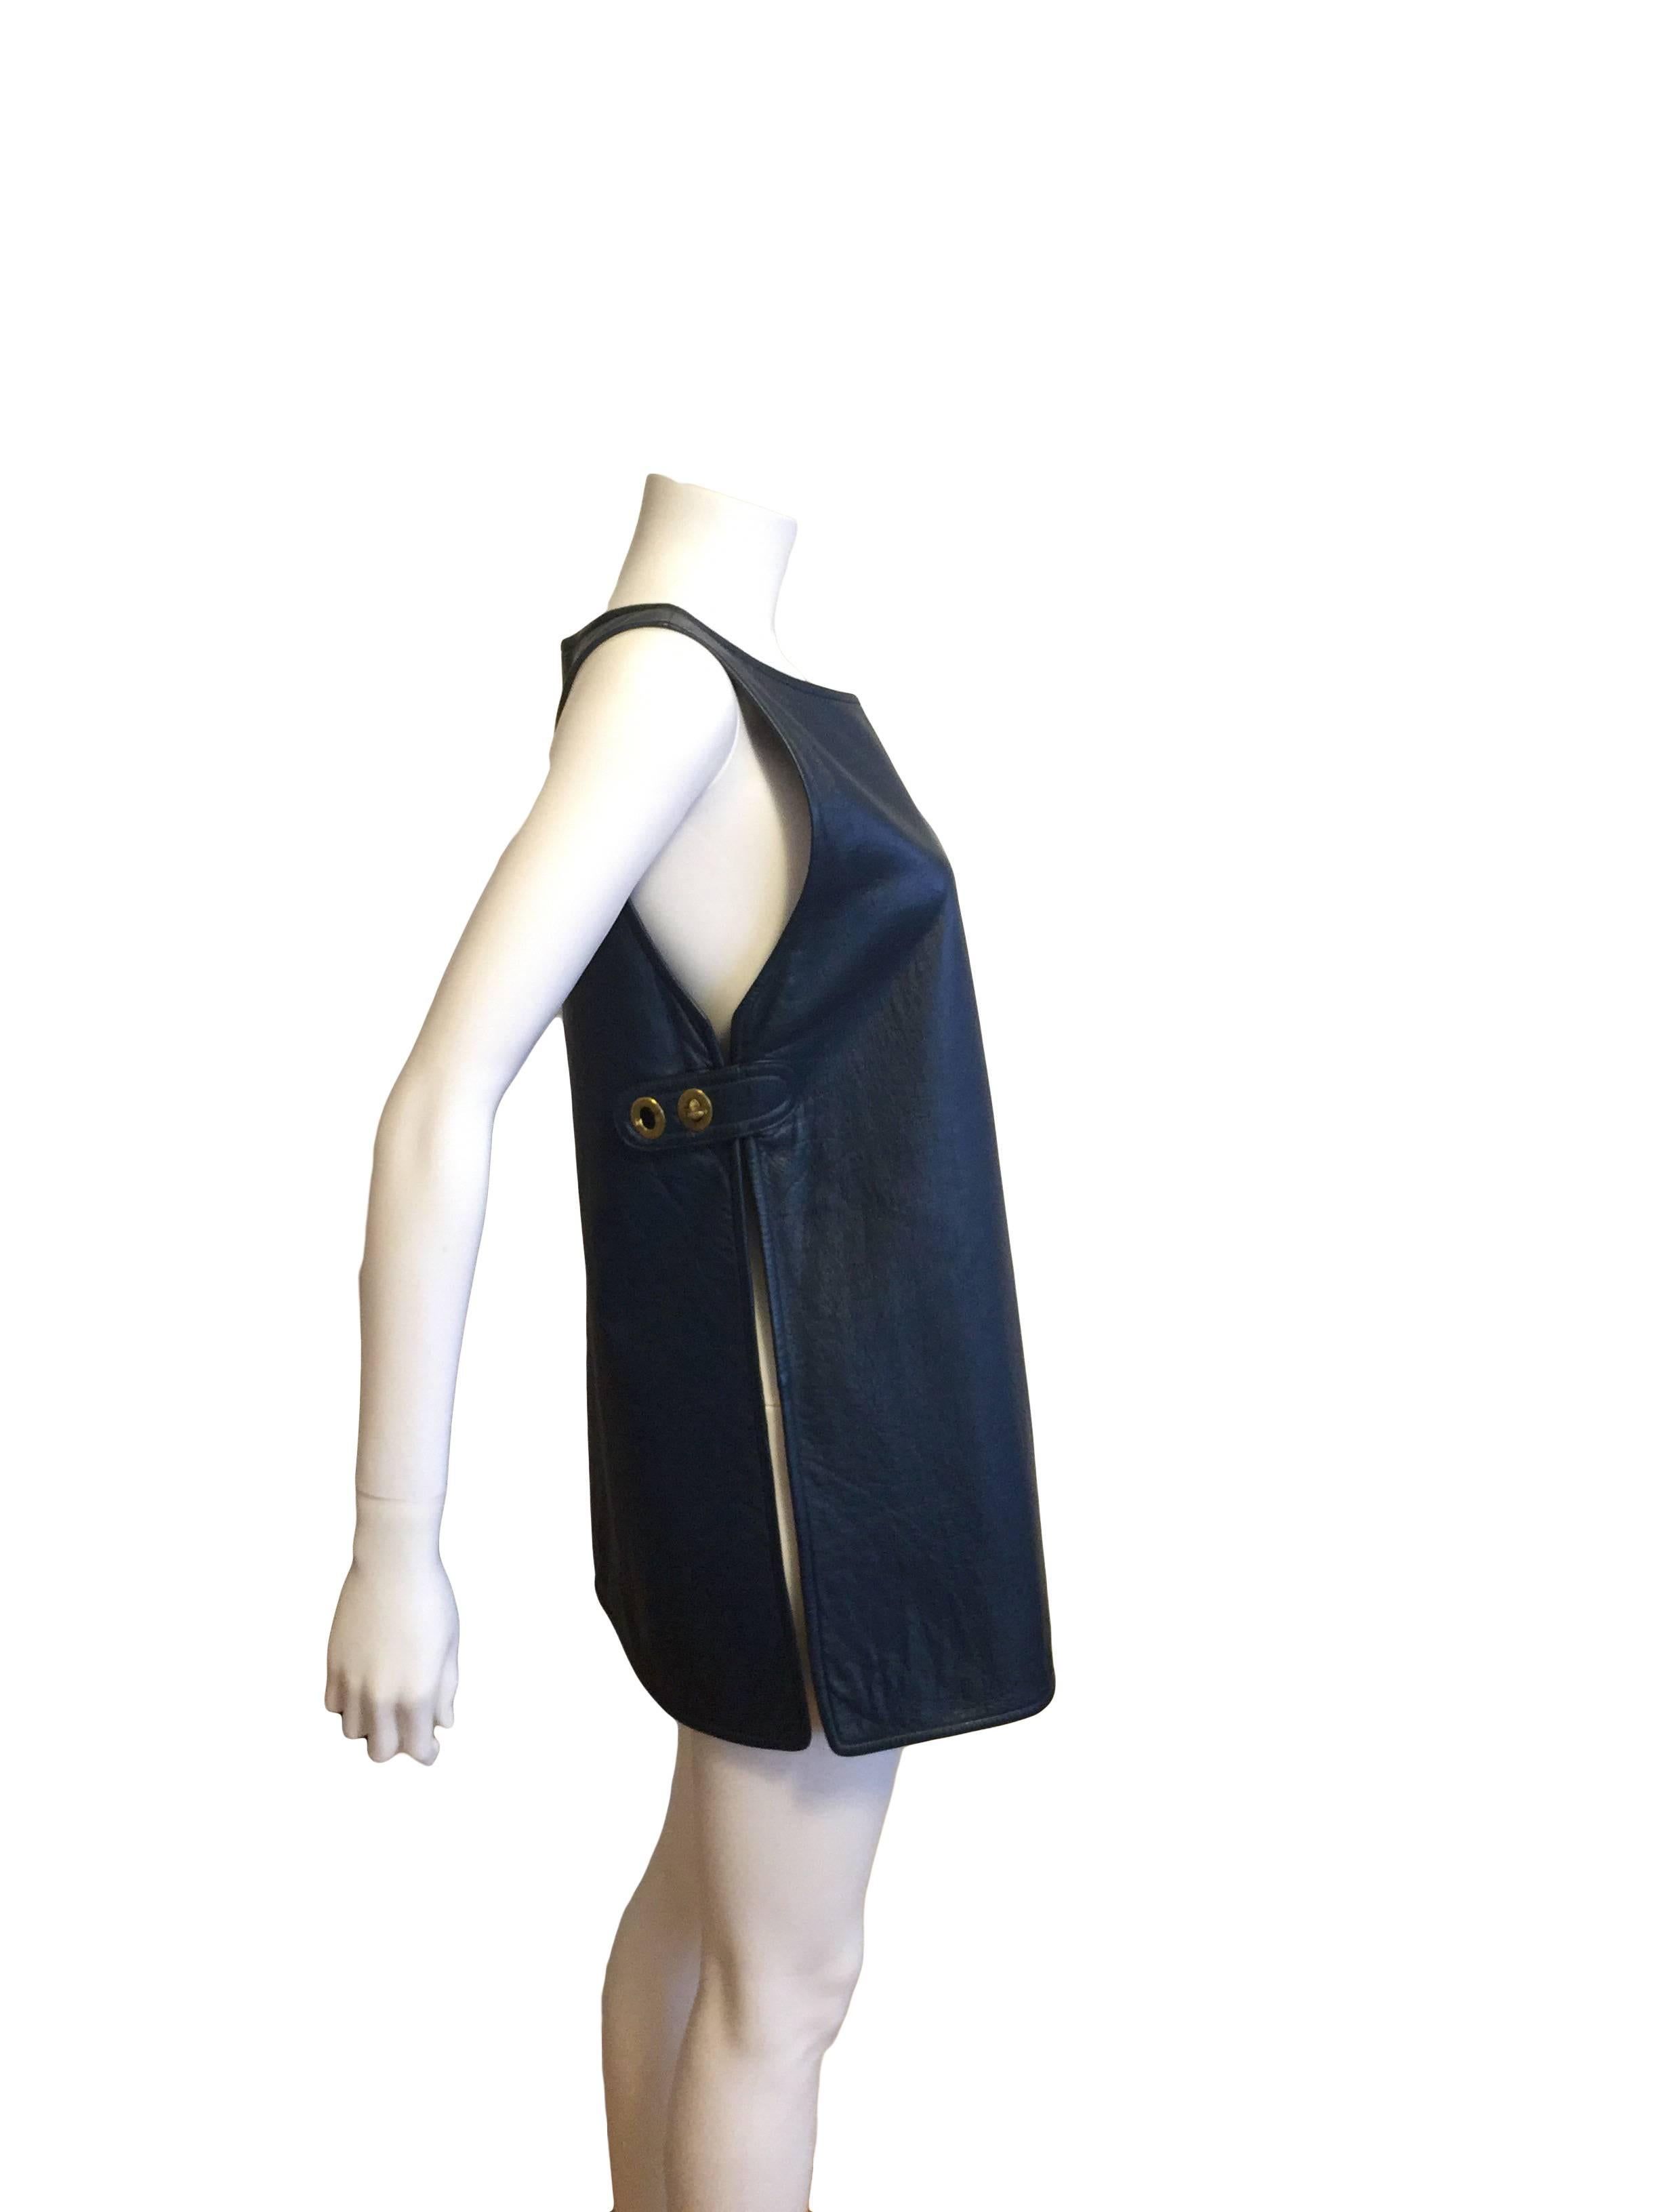 Important Bonnie Cashin for Sills Mod Navy Leather Tunic 1960s In Excellent Condition For Sale In Bethesda, MD